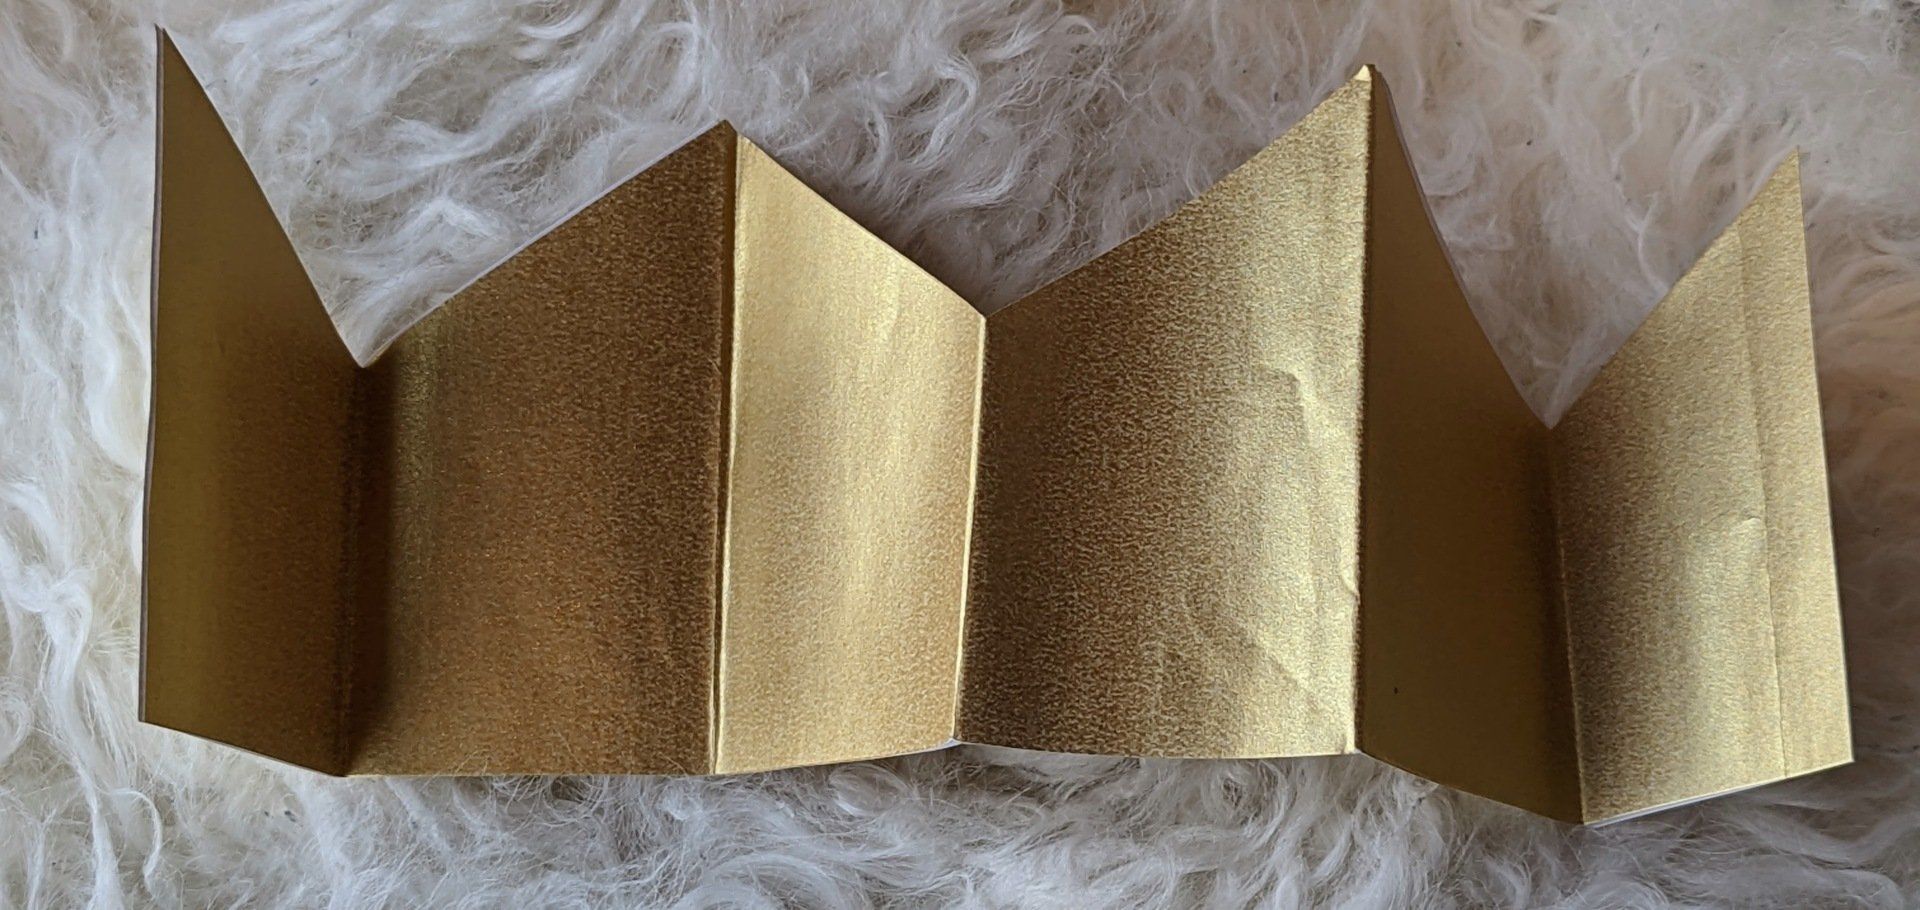 A gold paper crown